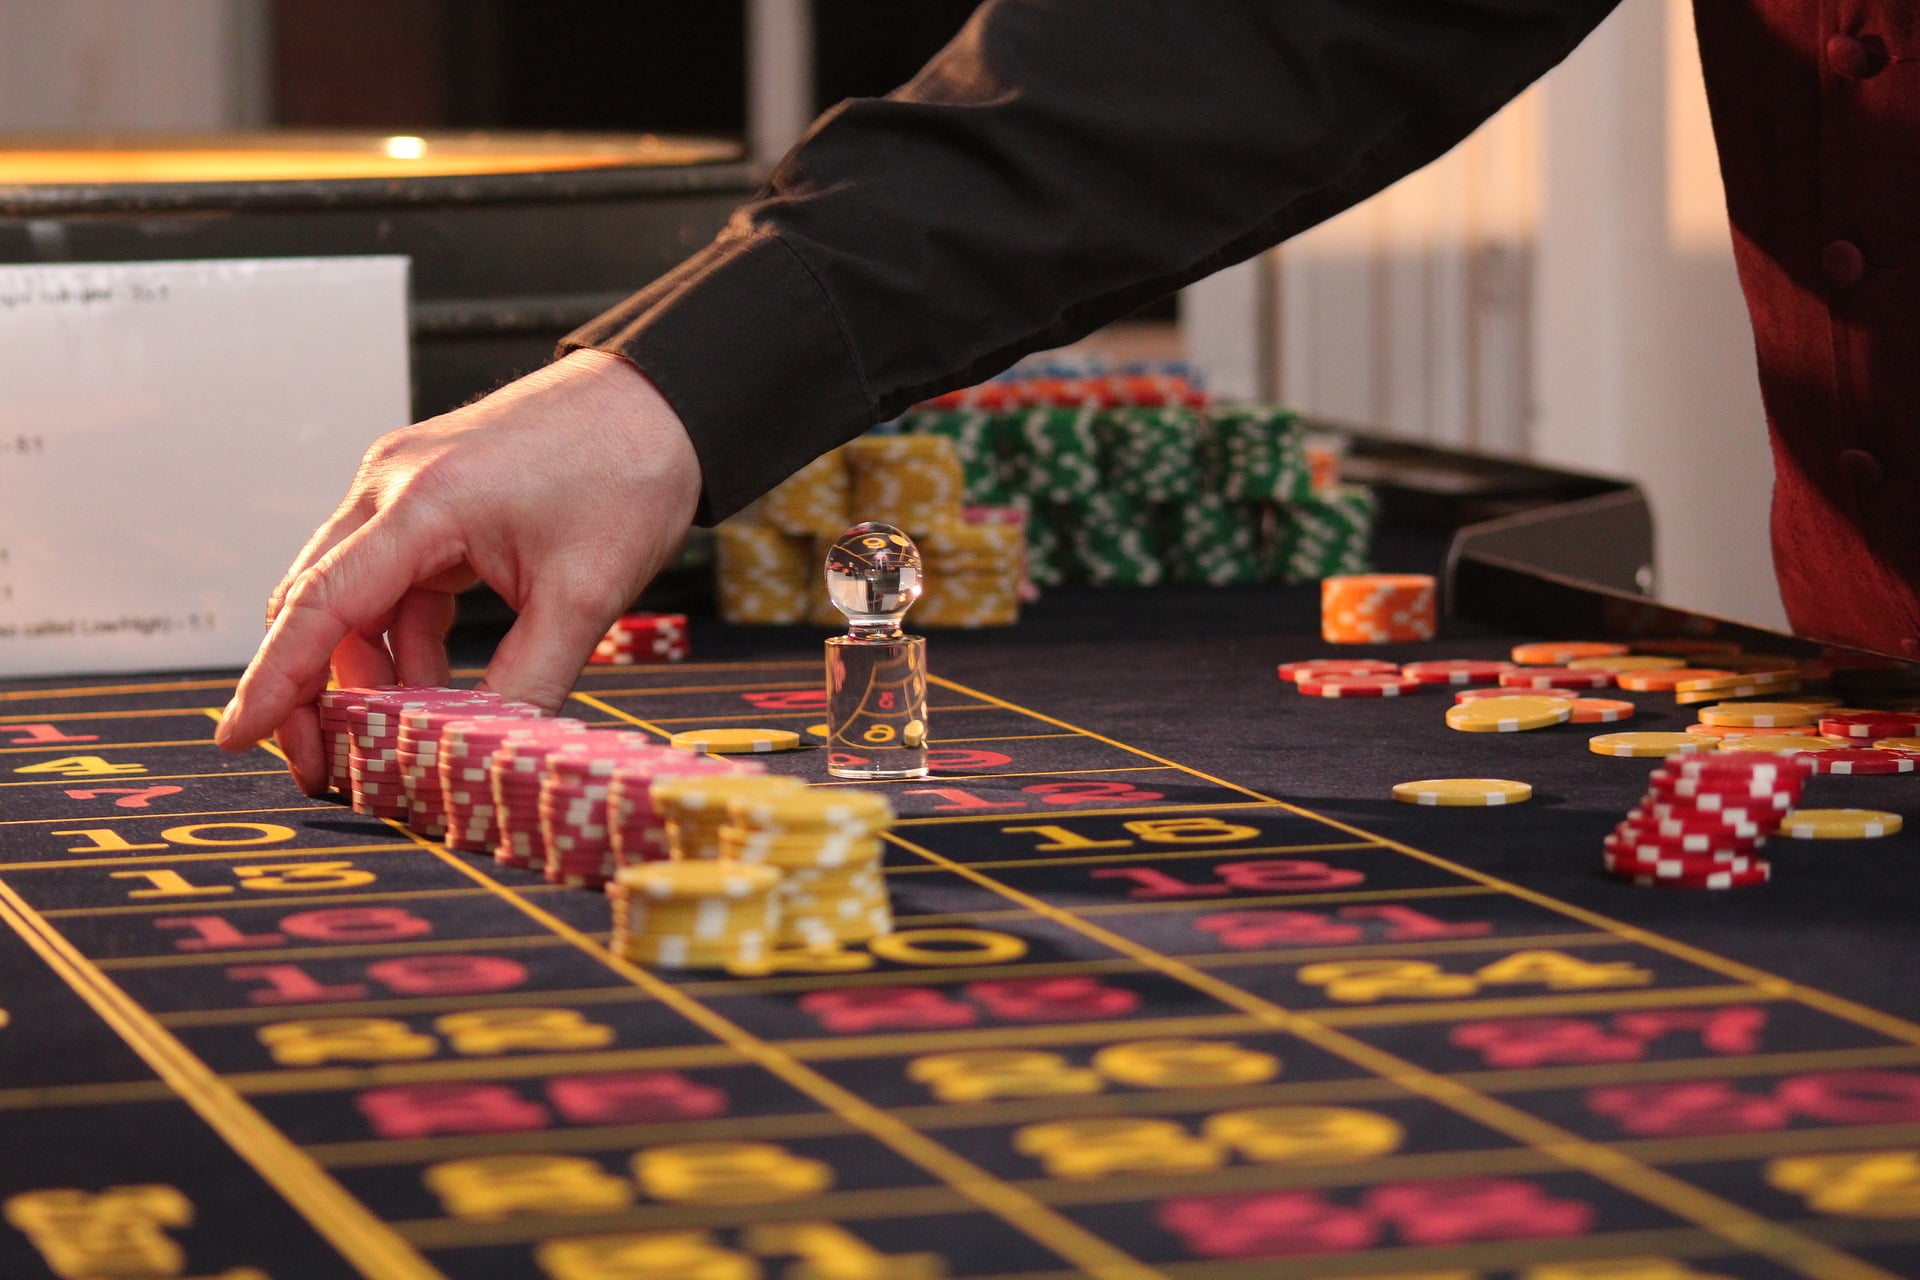 Exclusive Promotions and Bonuses: How to Take Advantage of RedBet Casino Offers